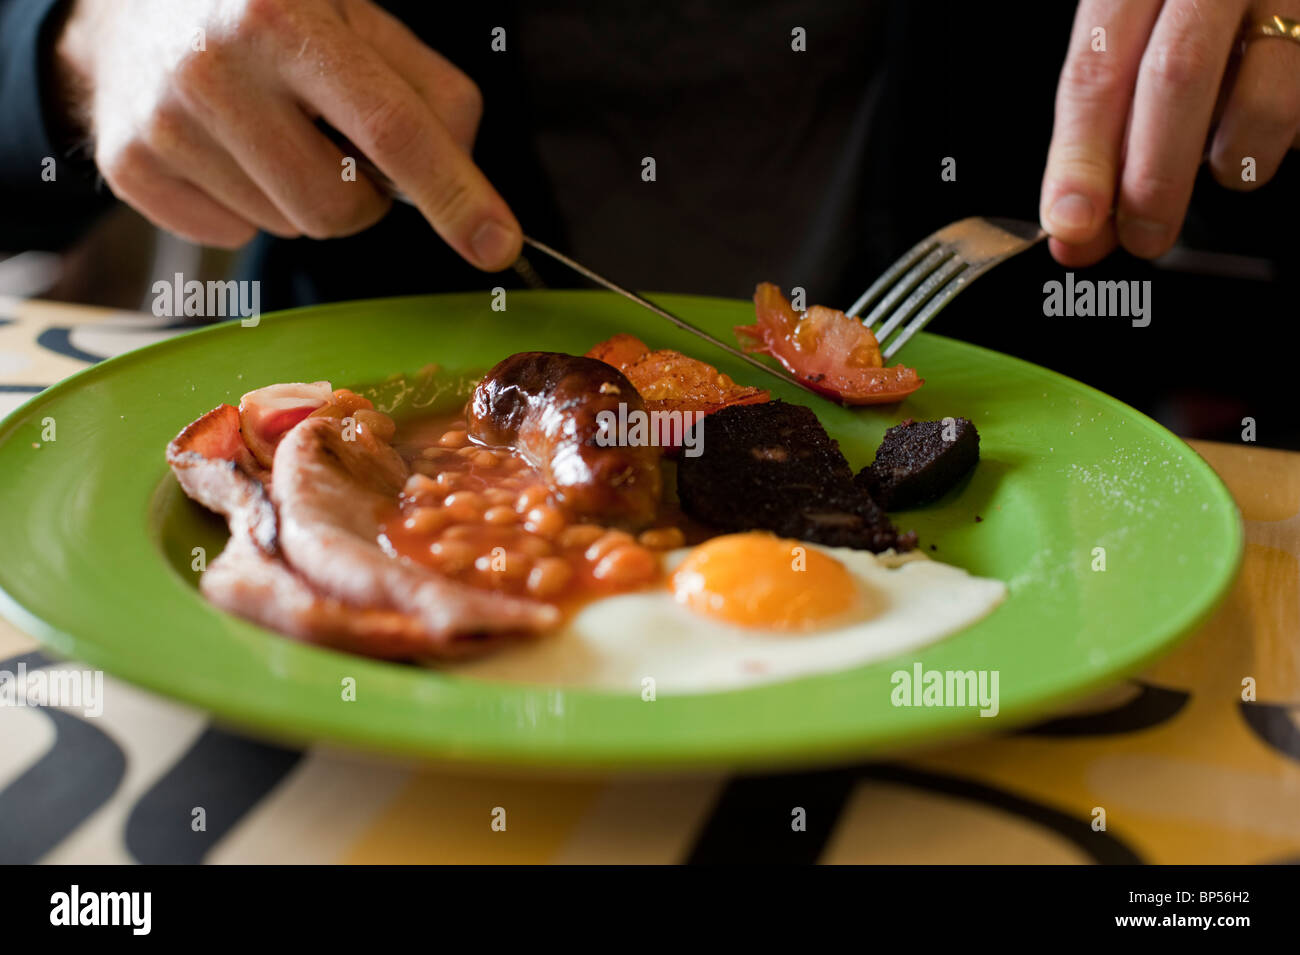 A man eats a full English breakfast (with eggs, bacon, beans, sausage, black pudding, tomato, and egg) at a cafe. Stock Photo